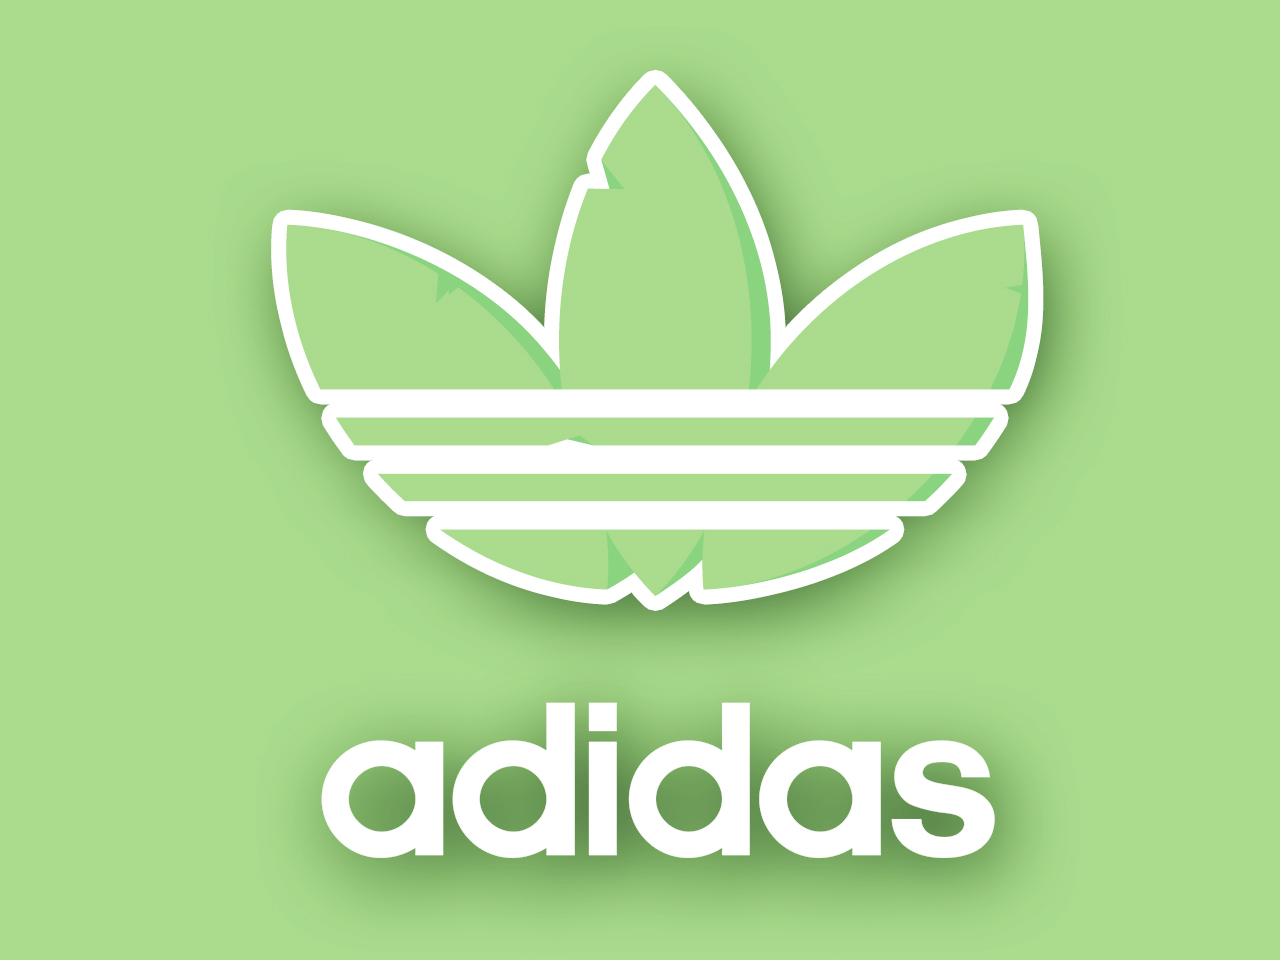 Adidas Redesign Concept by Adam Marr on Dribbble